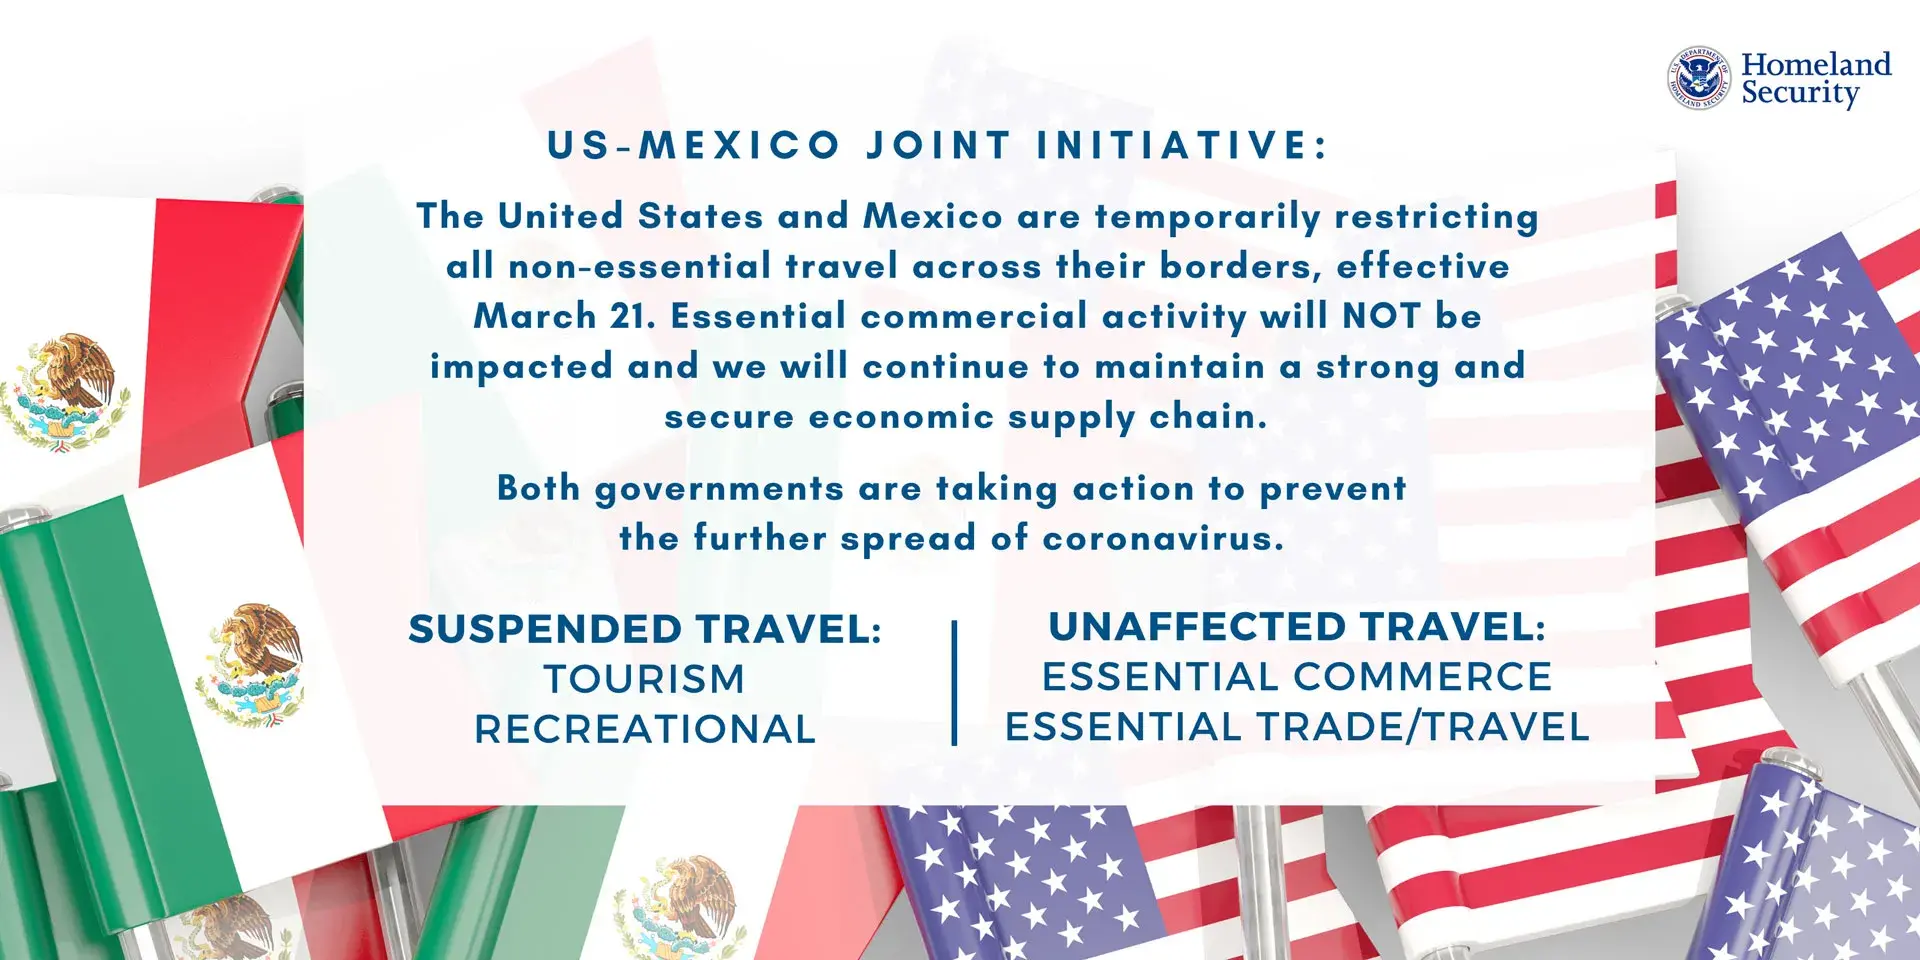 US-Mexico Joint Initiative: The United States and Mexico are temporarily restricting all non-essential travel across their borders, effective March 21. Essential commercial activity will NOT be impacted and we will continue to maintain a strong and secure economic supply chain. Both government are taking action to prevent the further spread of coronavirus. | Suspended Travel: Tourism, Recreational | Unaffected Travel: Essential Commerce, Essential Trade/Travel